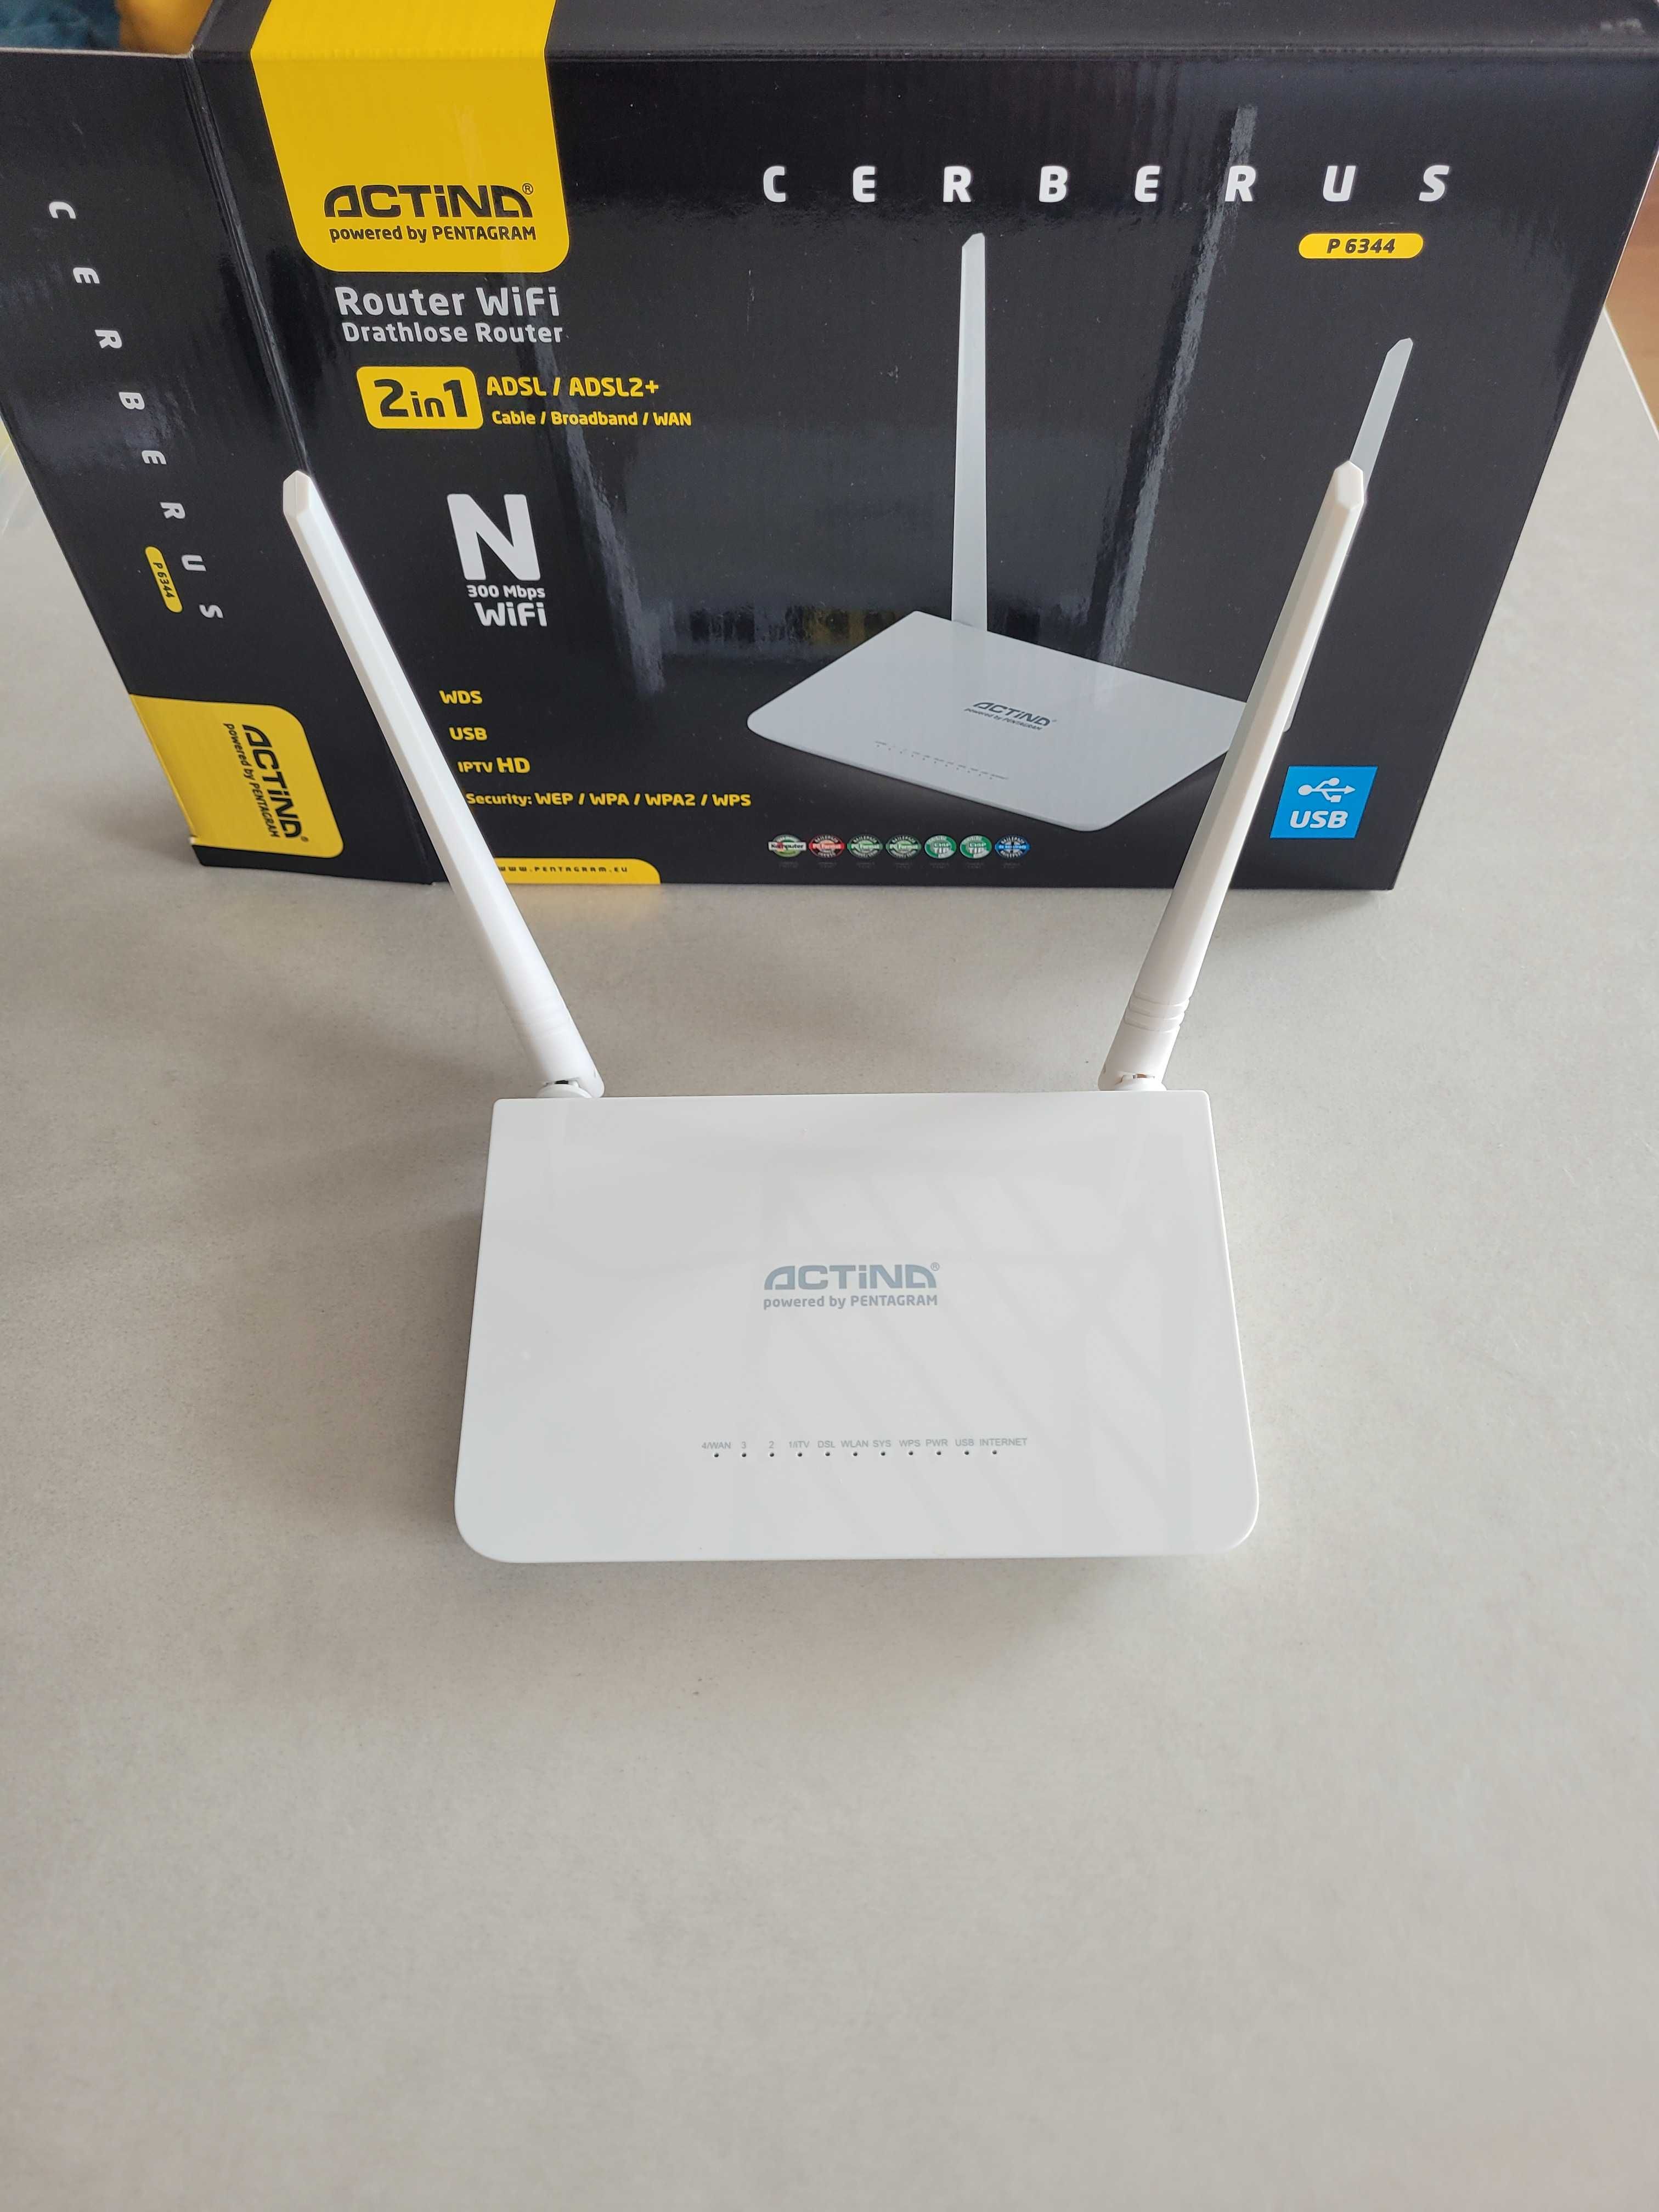 Router Actina by Pentagram P6344 ADSL2, WiFi, 300M, USB